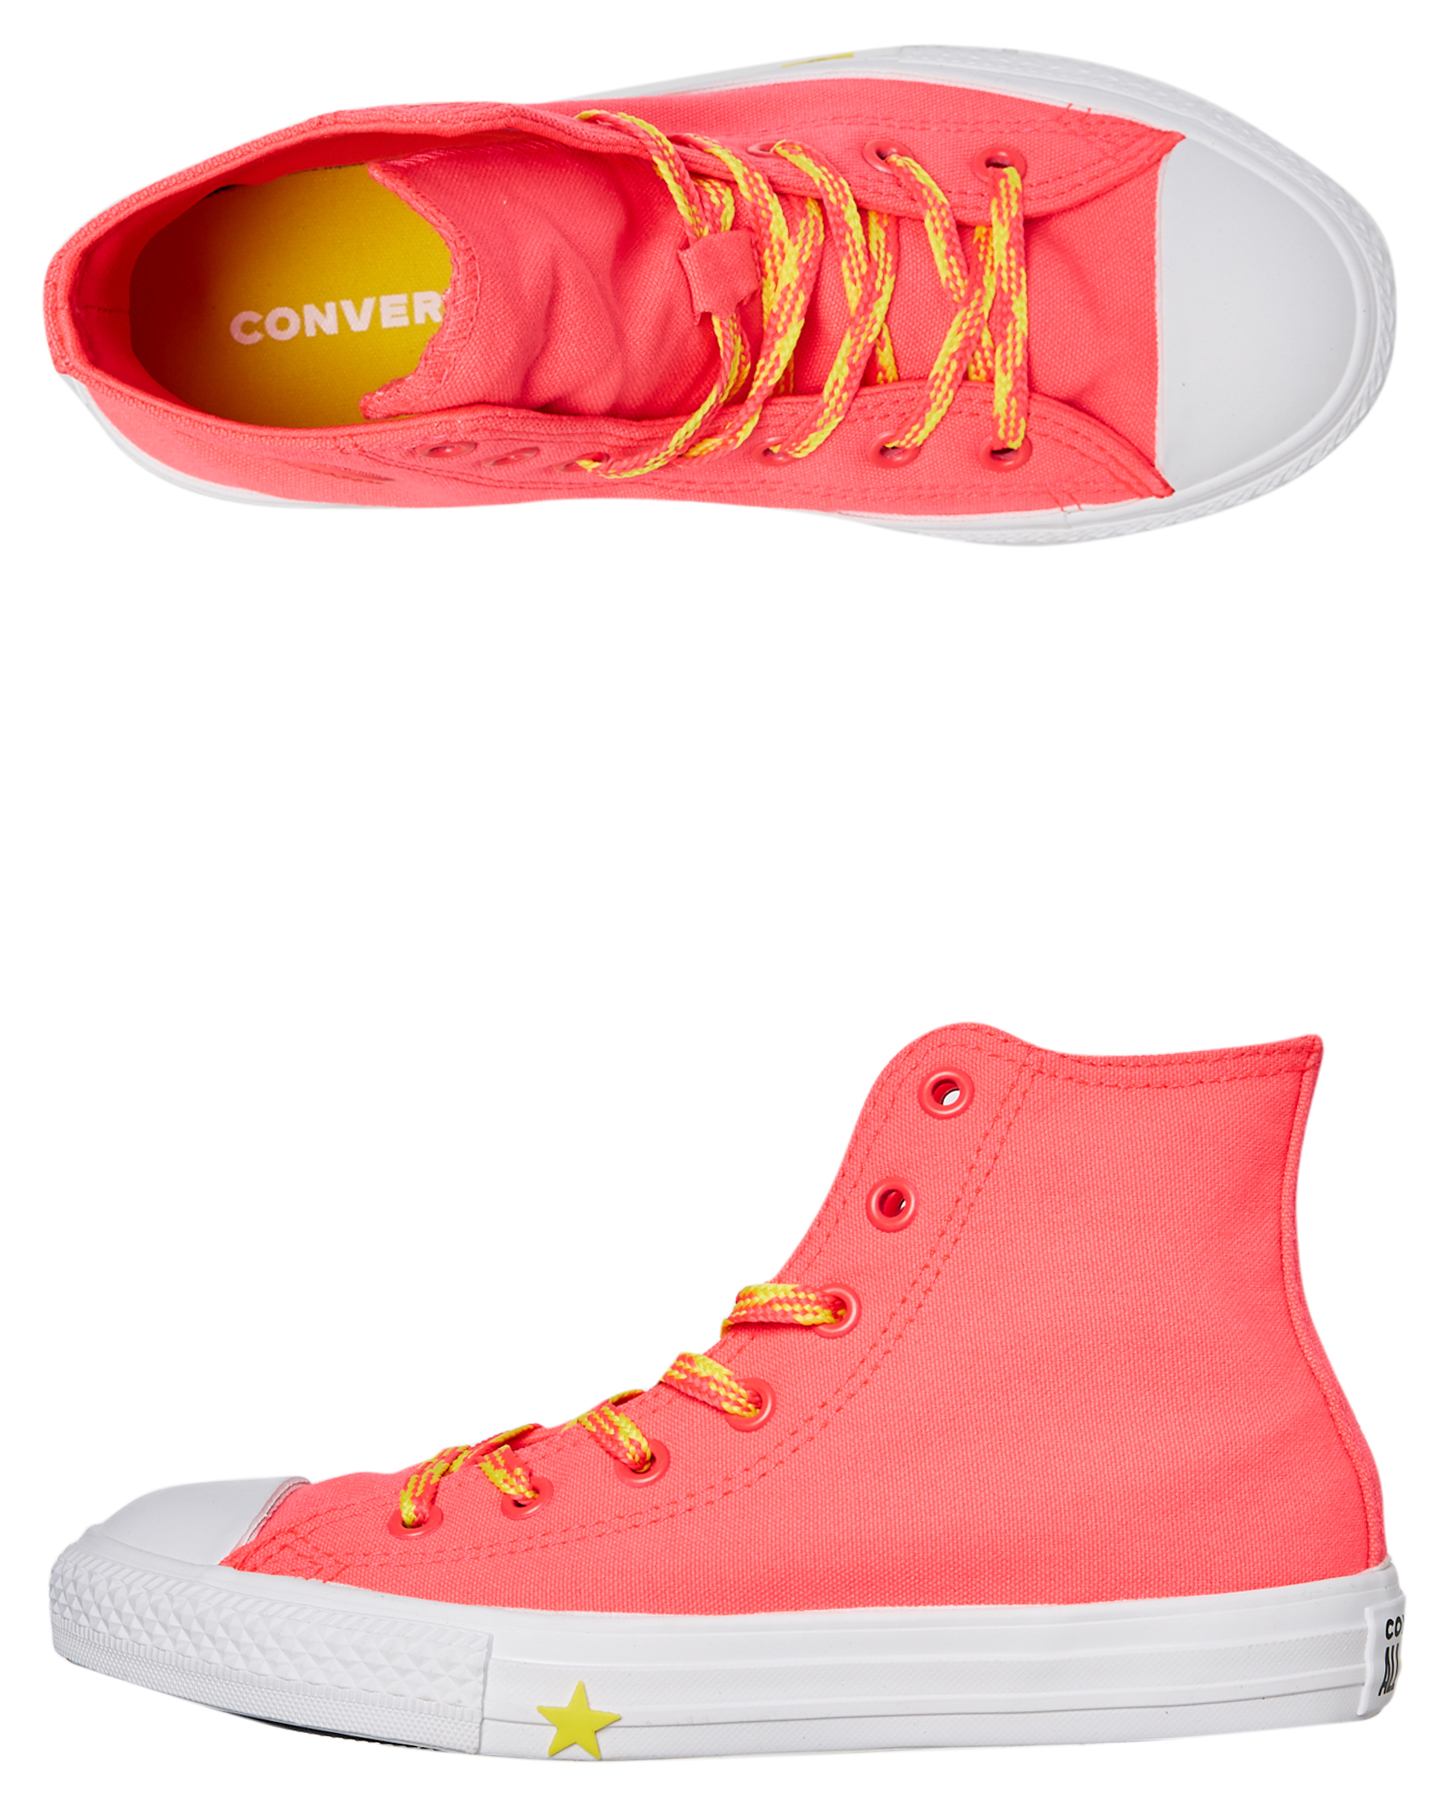 Converse Chuck Taylor All Star Glow Up Shoe - Youth - Racer Pink ...